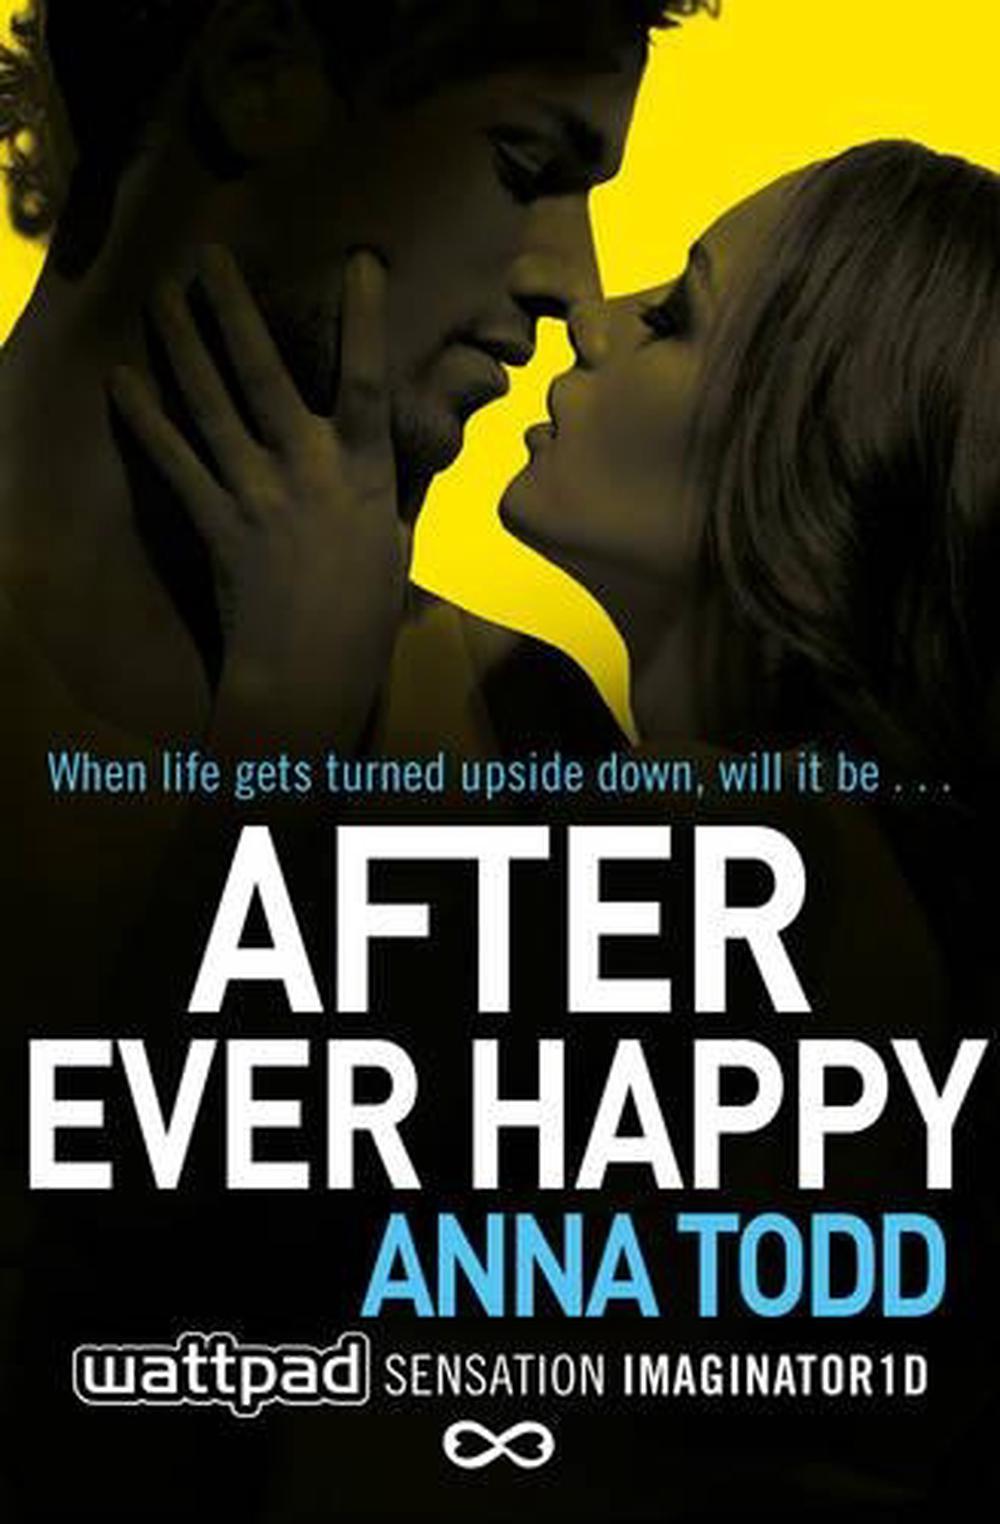 Ever　9781501106842　After　The　online　at　Anna　Happy　Buy　Paperback,　by　Todd,　Nile